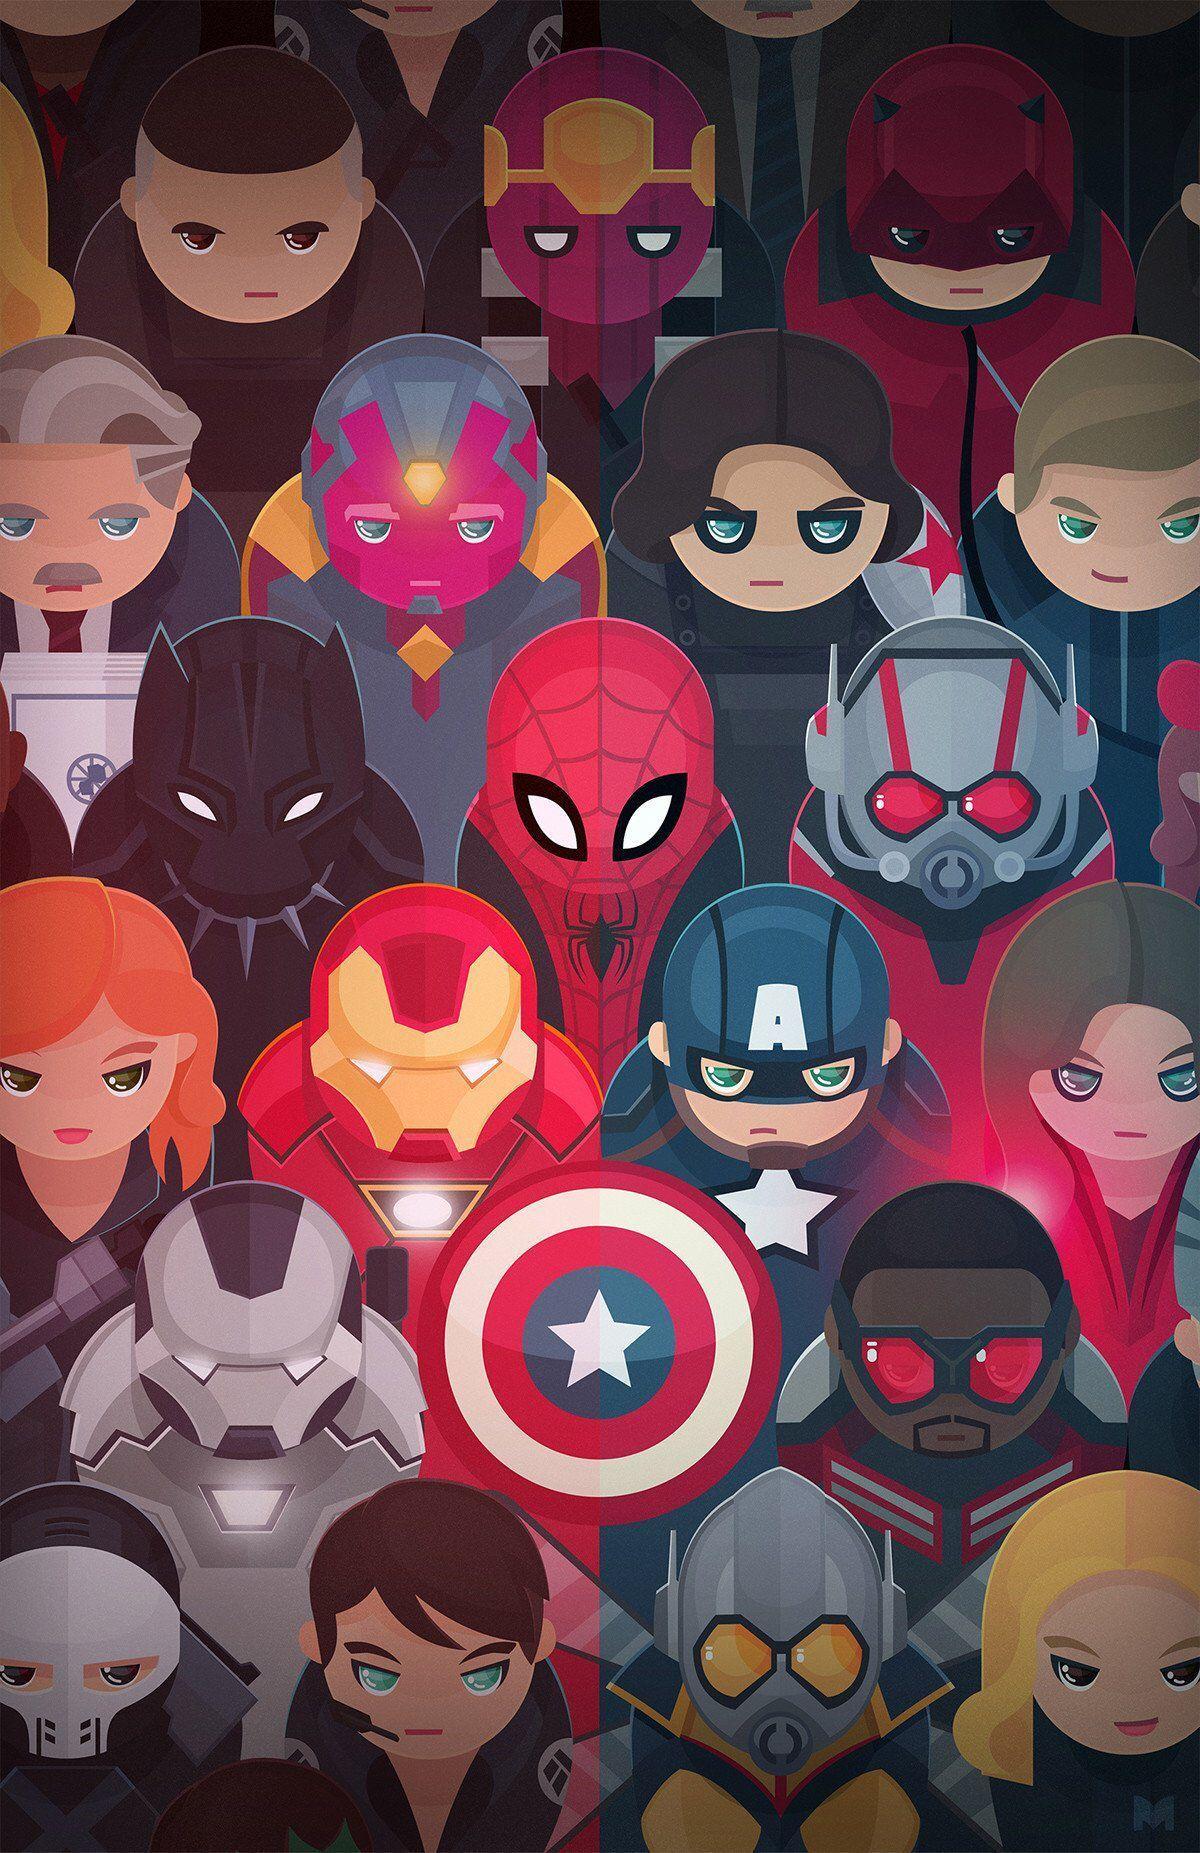 Marvel love!! The best art including majority of the superheroes <3